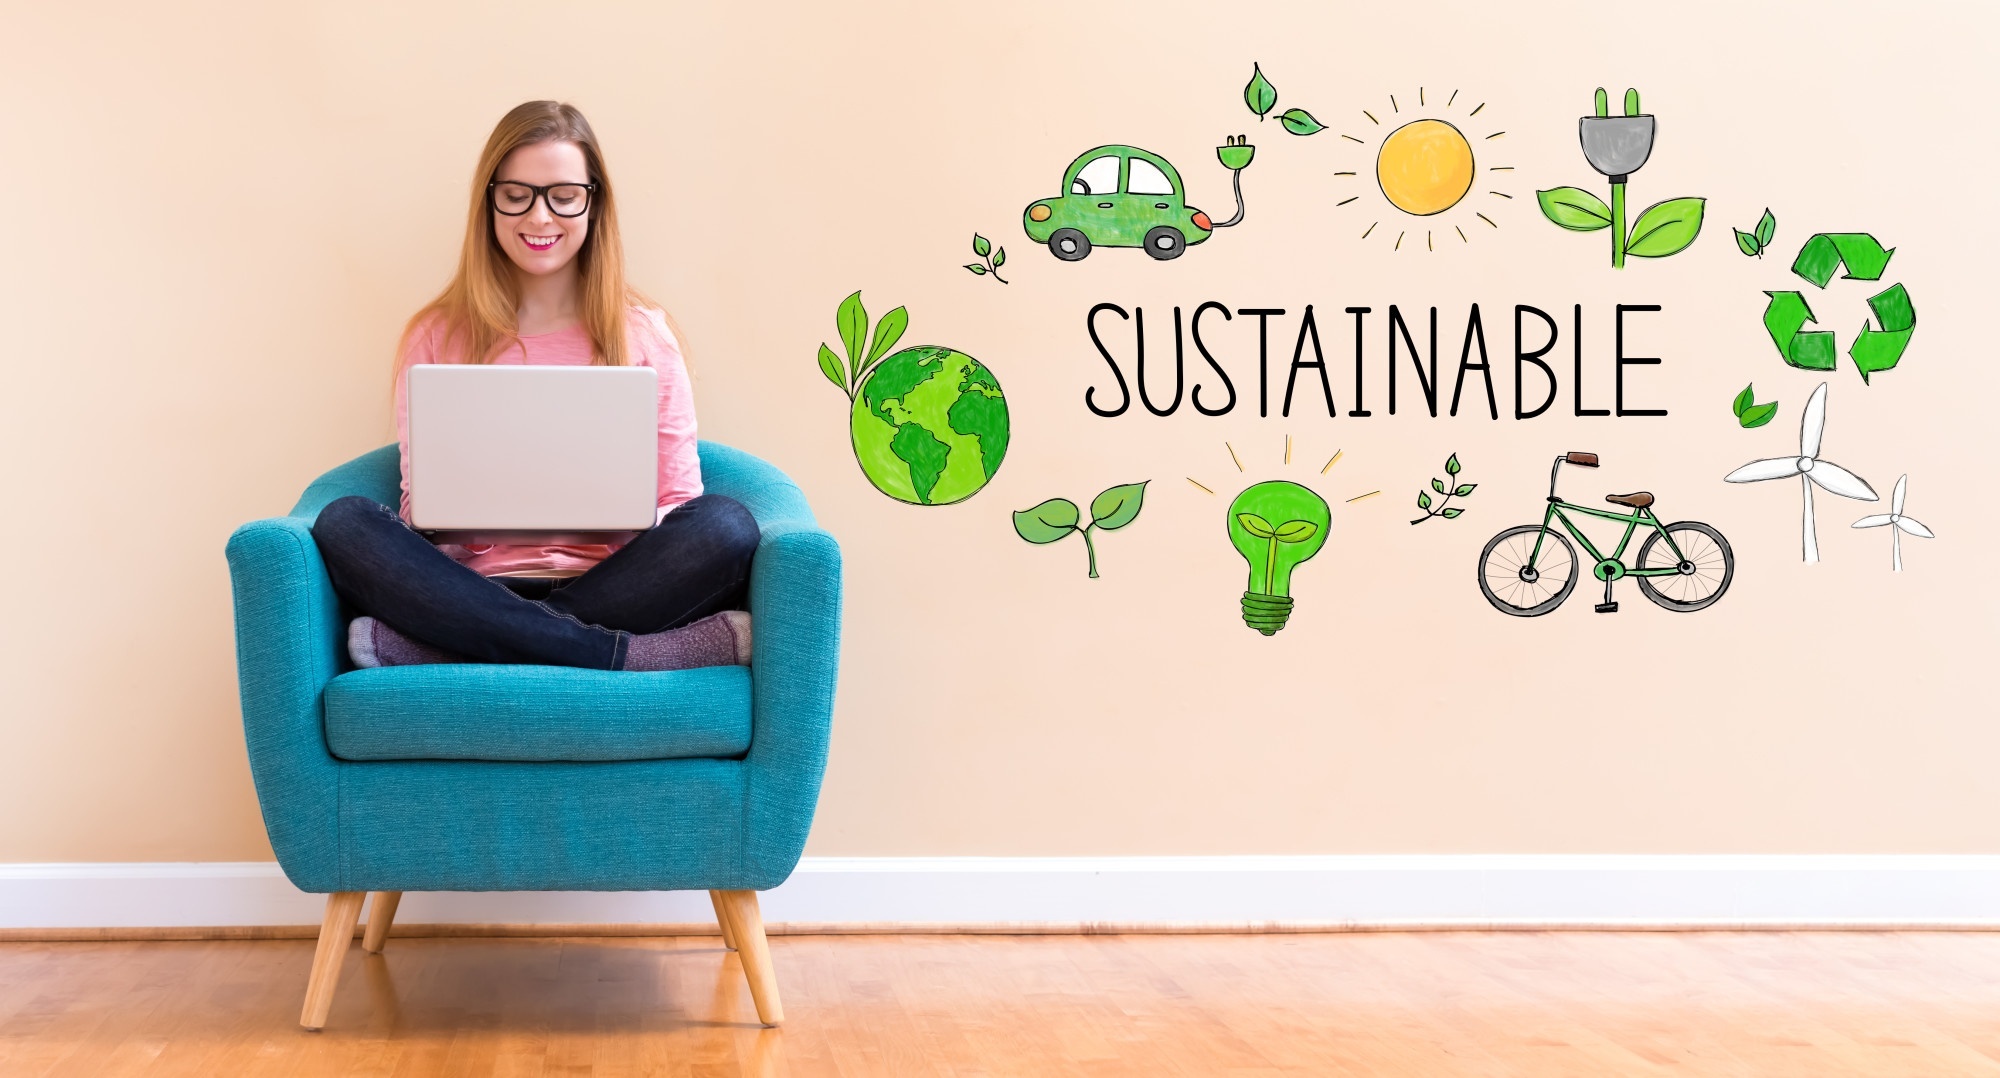 Lighten Your Footprint- 5 Ways to Stay Eco-Conscious at Home